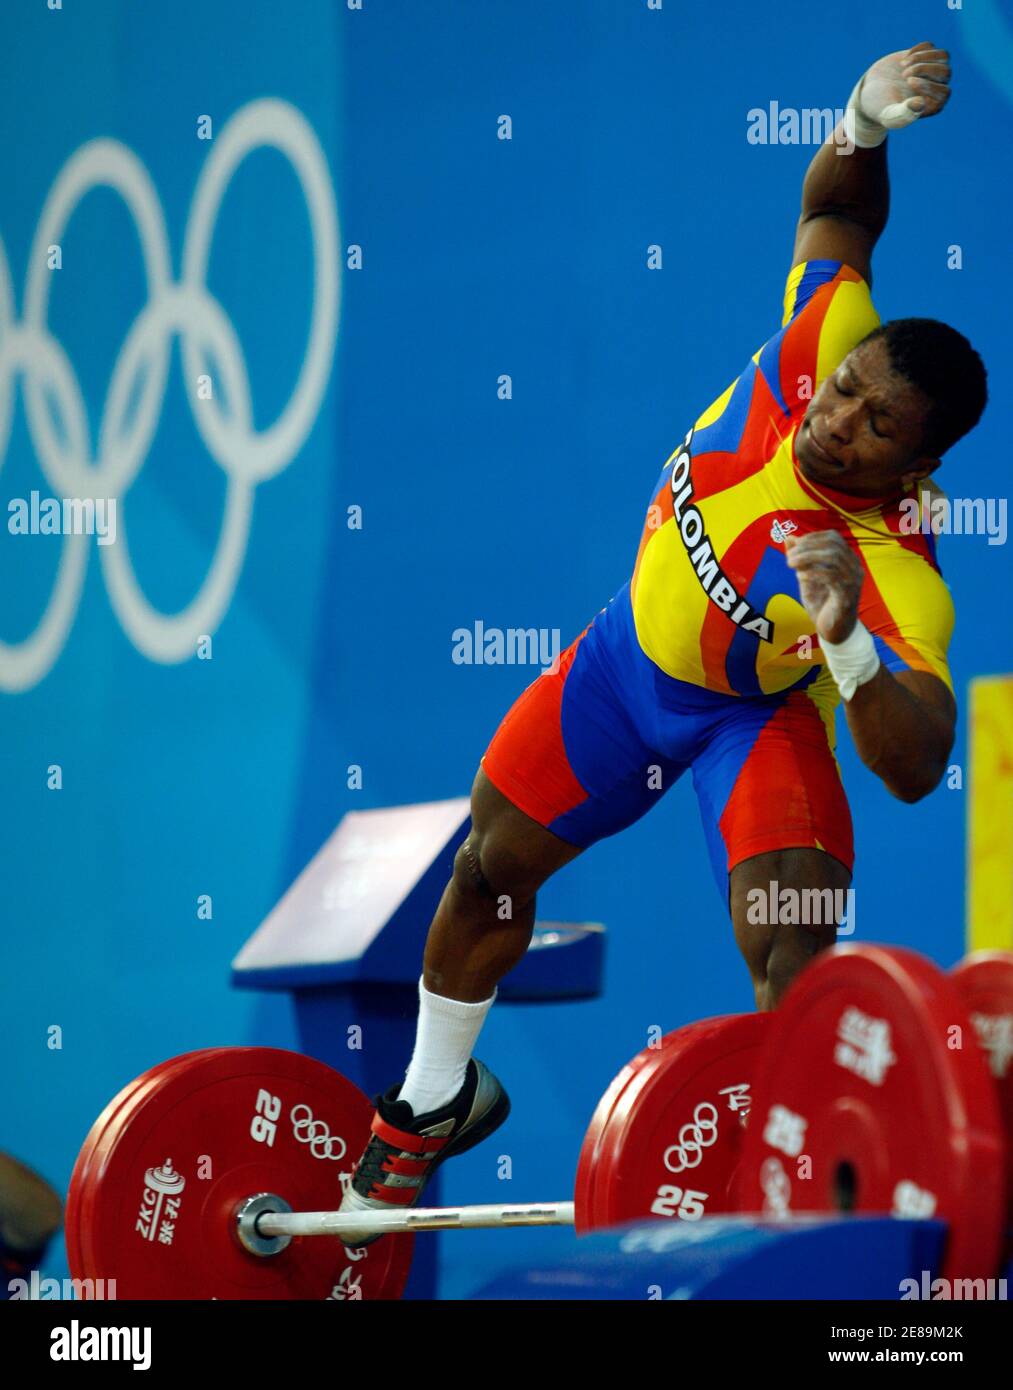 Colombia's Oscar Figueroa's hand slips off the barbell in the men's 62kg  Group A weightlifting snatch competition at the Beijing 2008 Olympic Games  August 11, 2008. REUTERS/Oleg Popov (CHINA Stock Photo - Alamy